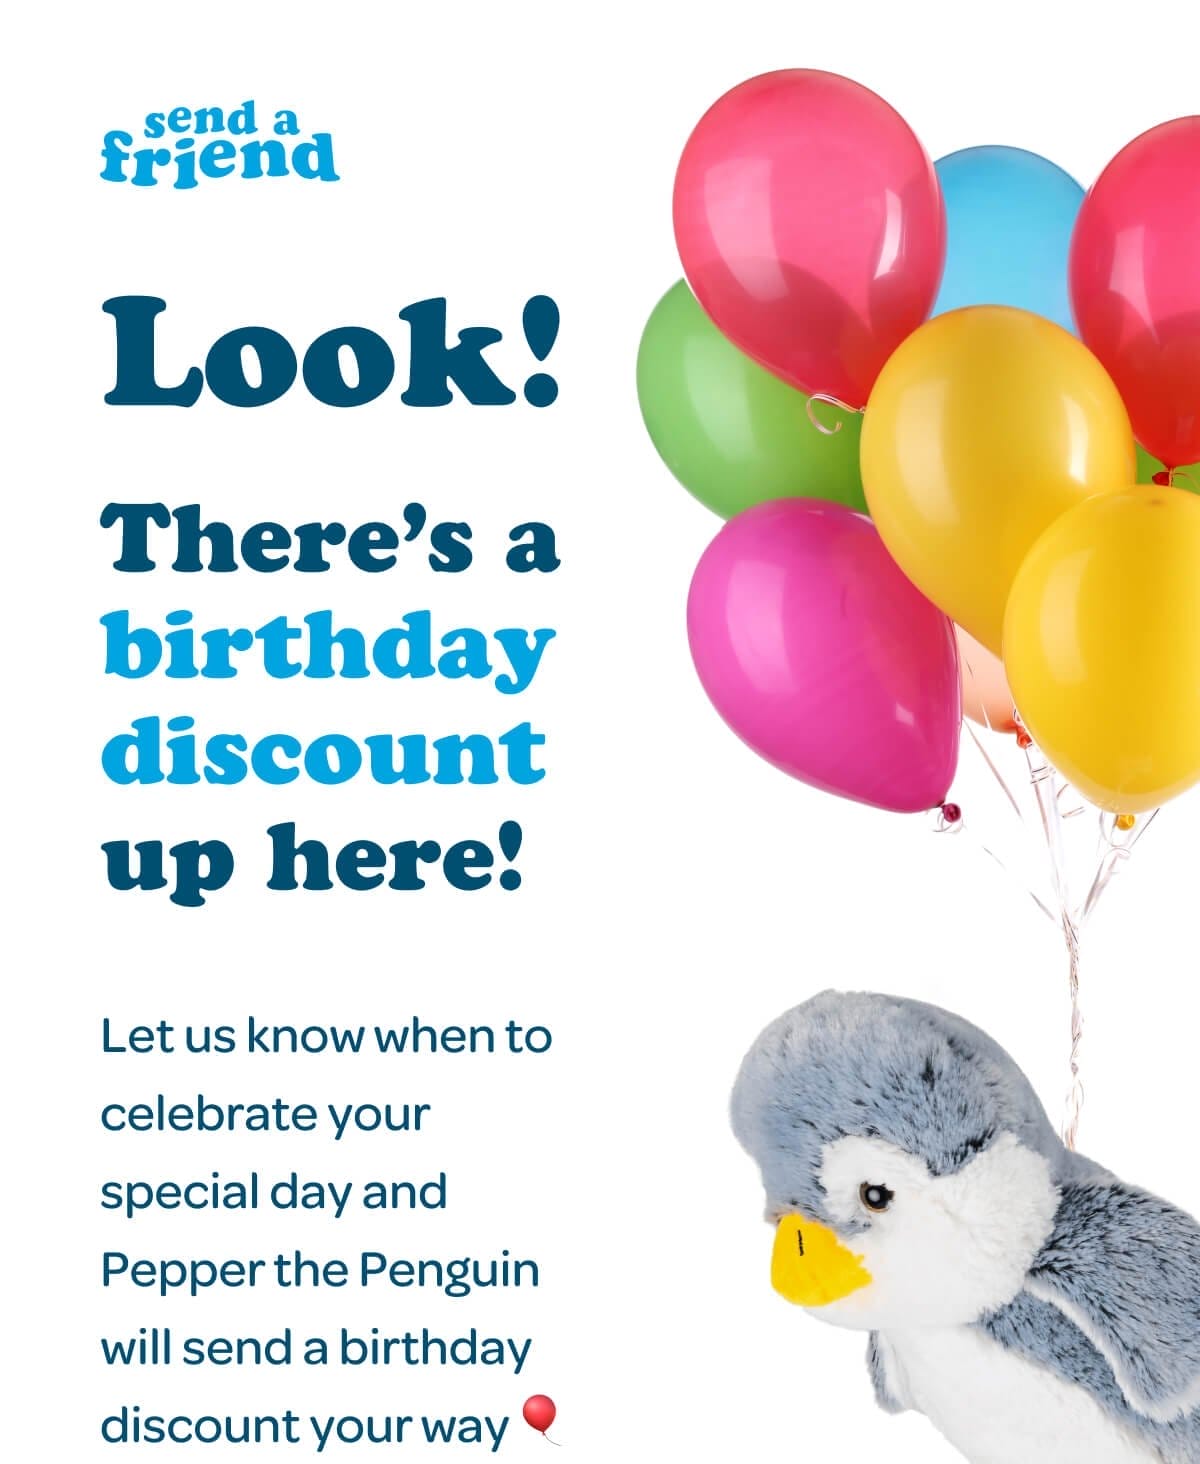 Look! There’s a birthday discount up here! Let us know when to celebrate your special day and Pepper the Penguin will send a birthday discount your way 🎈